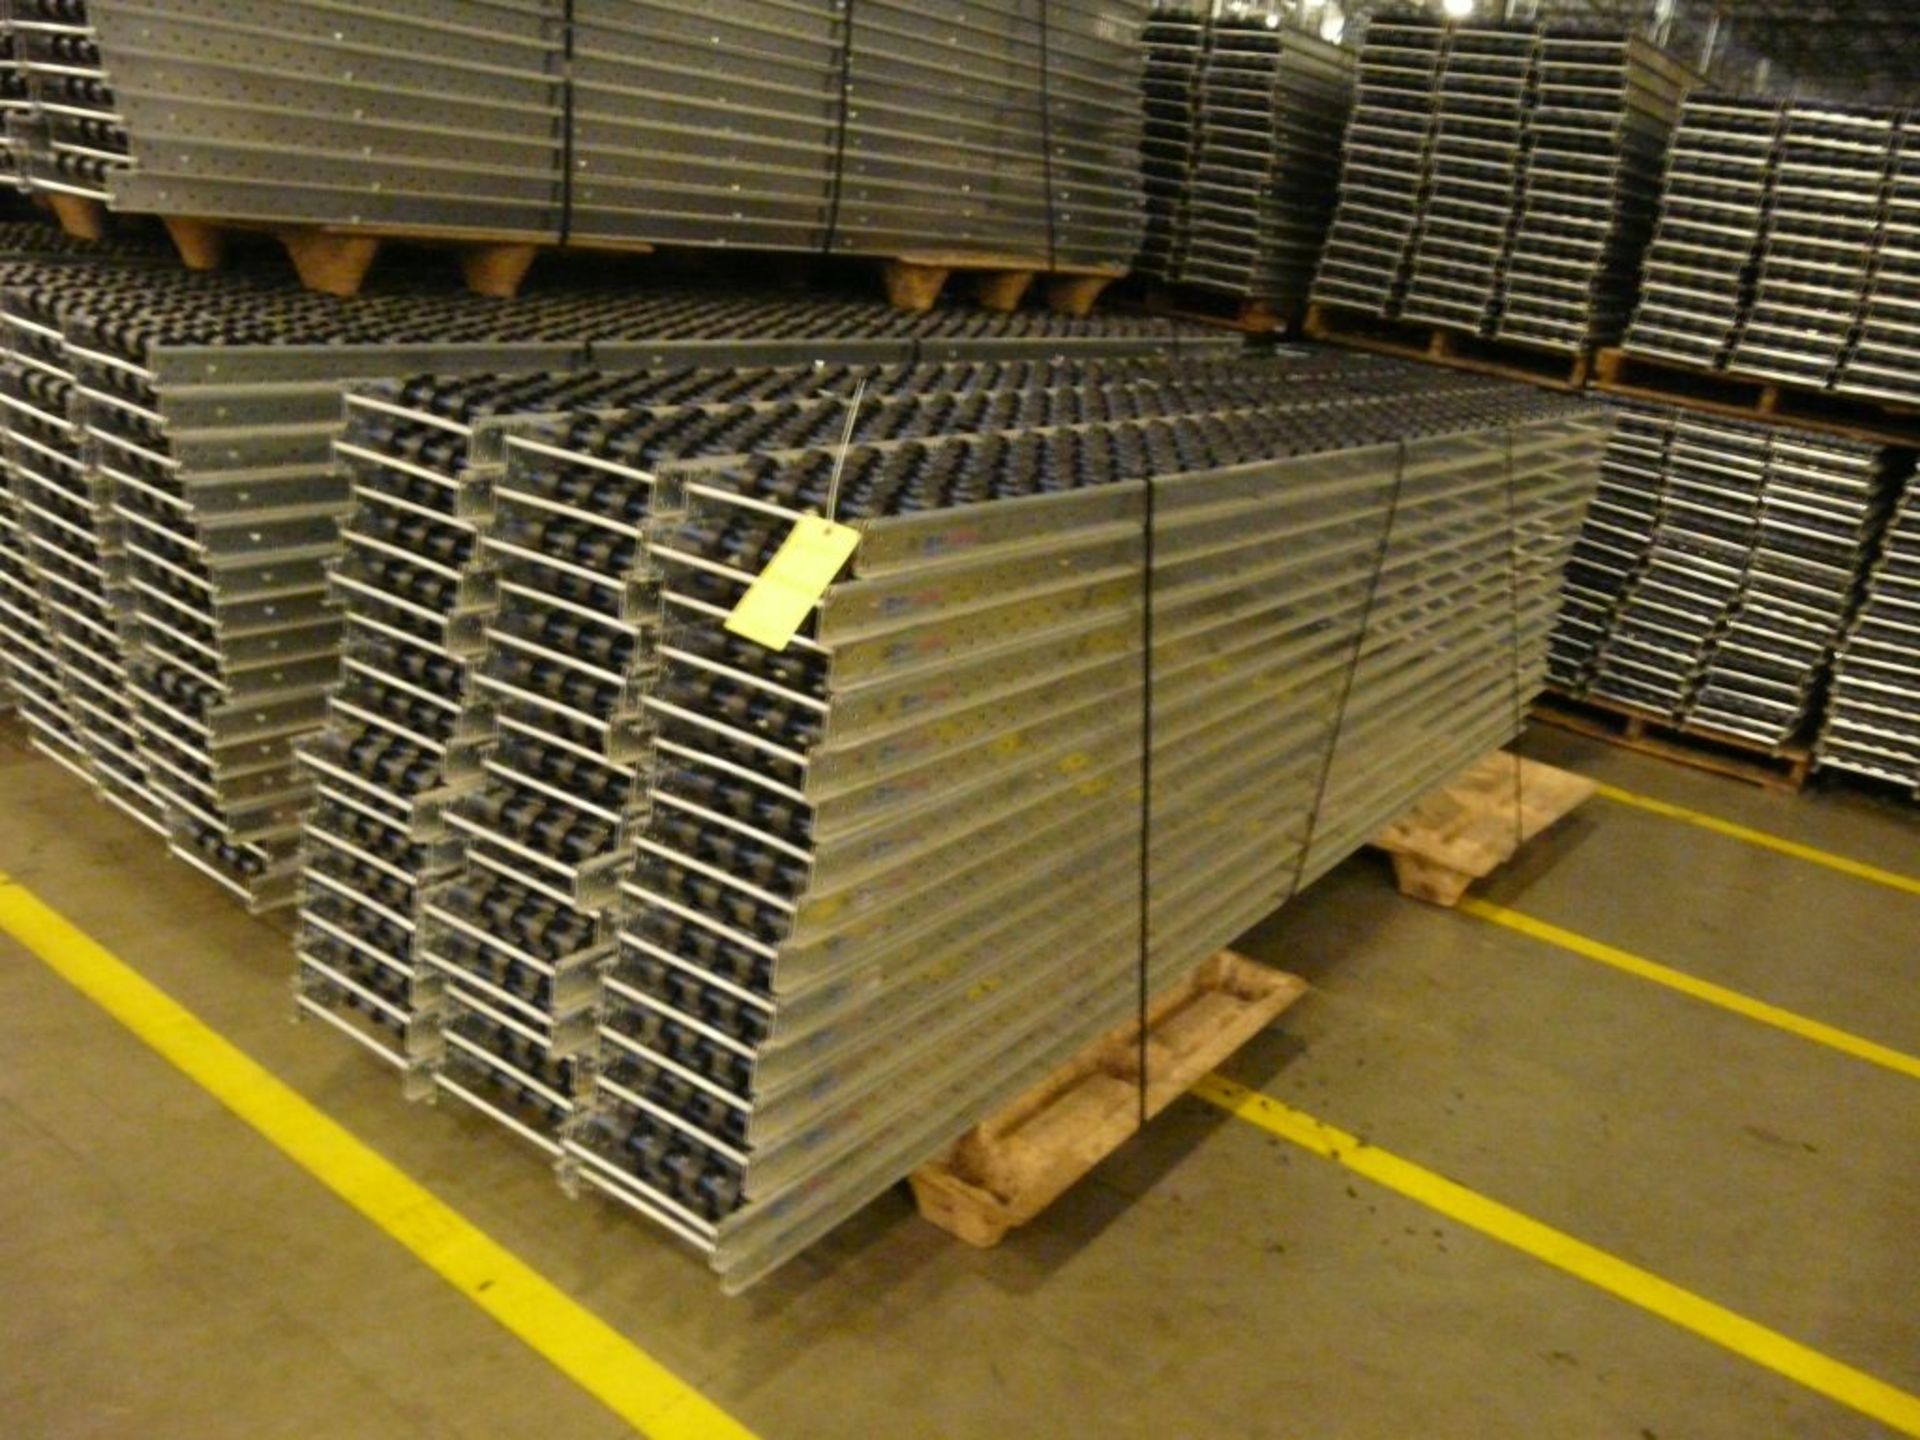 Lot of (90) SpanTrack Wheelbed Carton Flow Conveyors - 11.5'L x 11"W; Tag: 223551 - $30 Lot